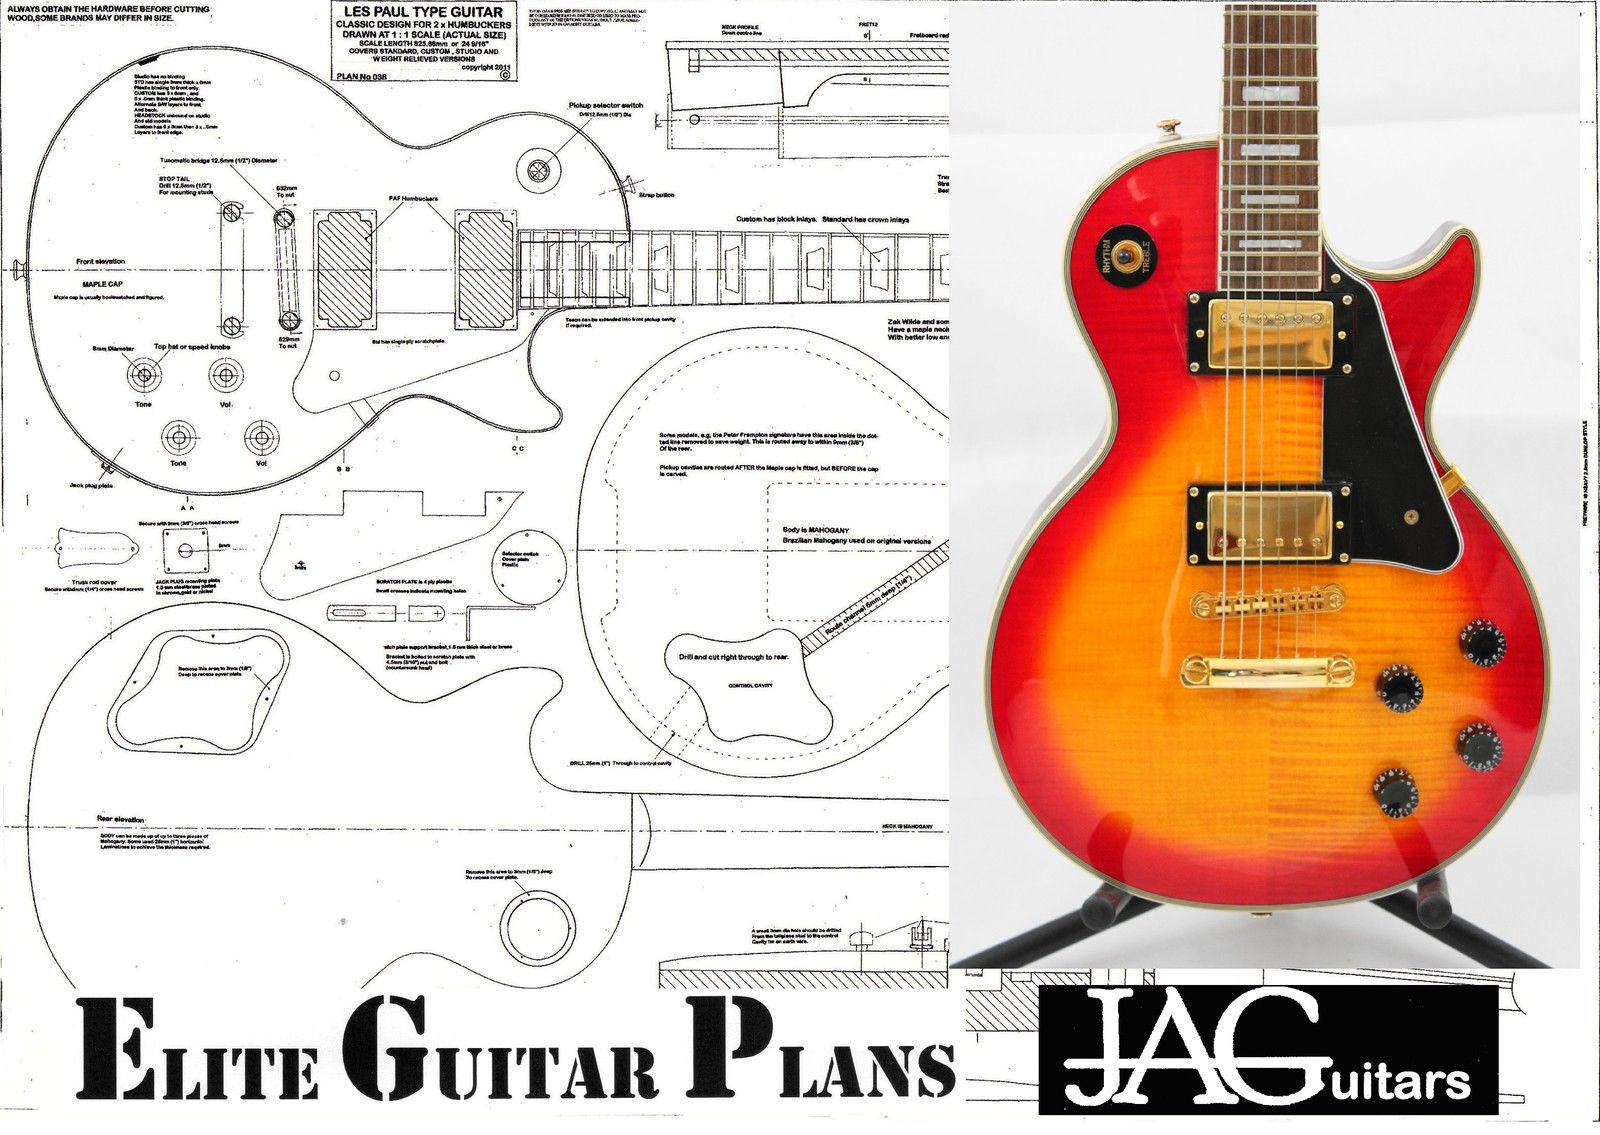 Wiring Schematic For Gibson Les Paul - PUTERI-HANNA